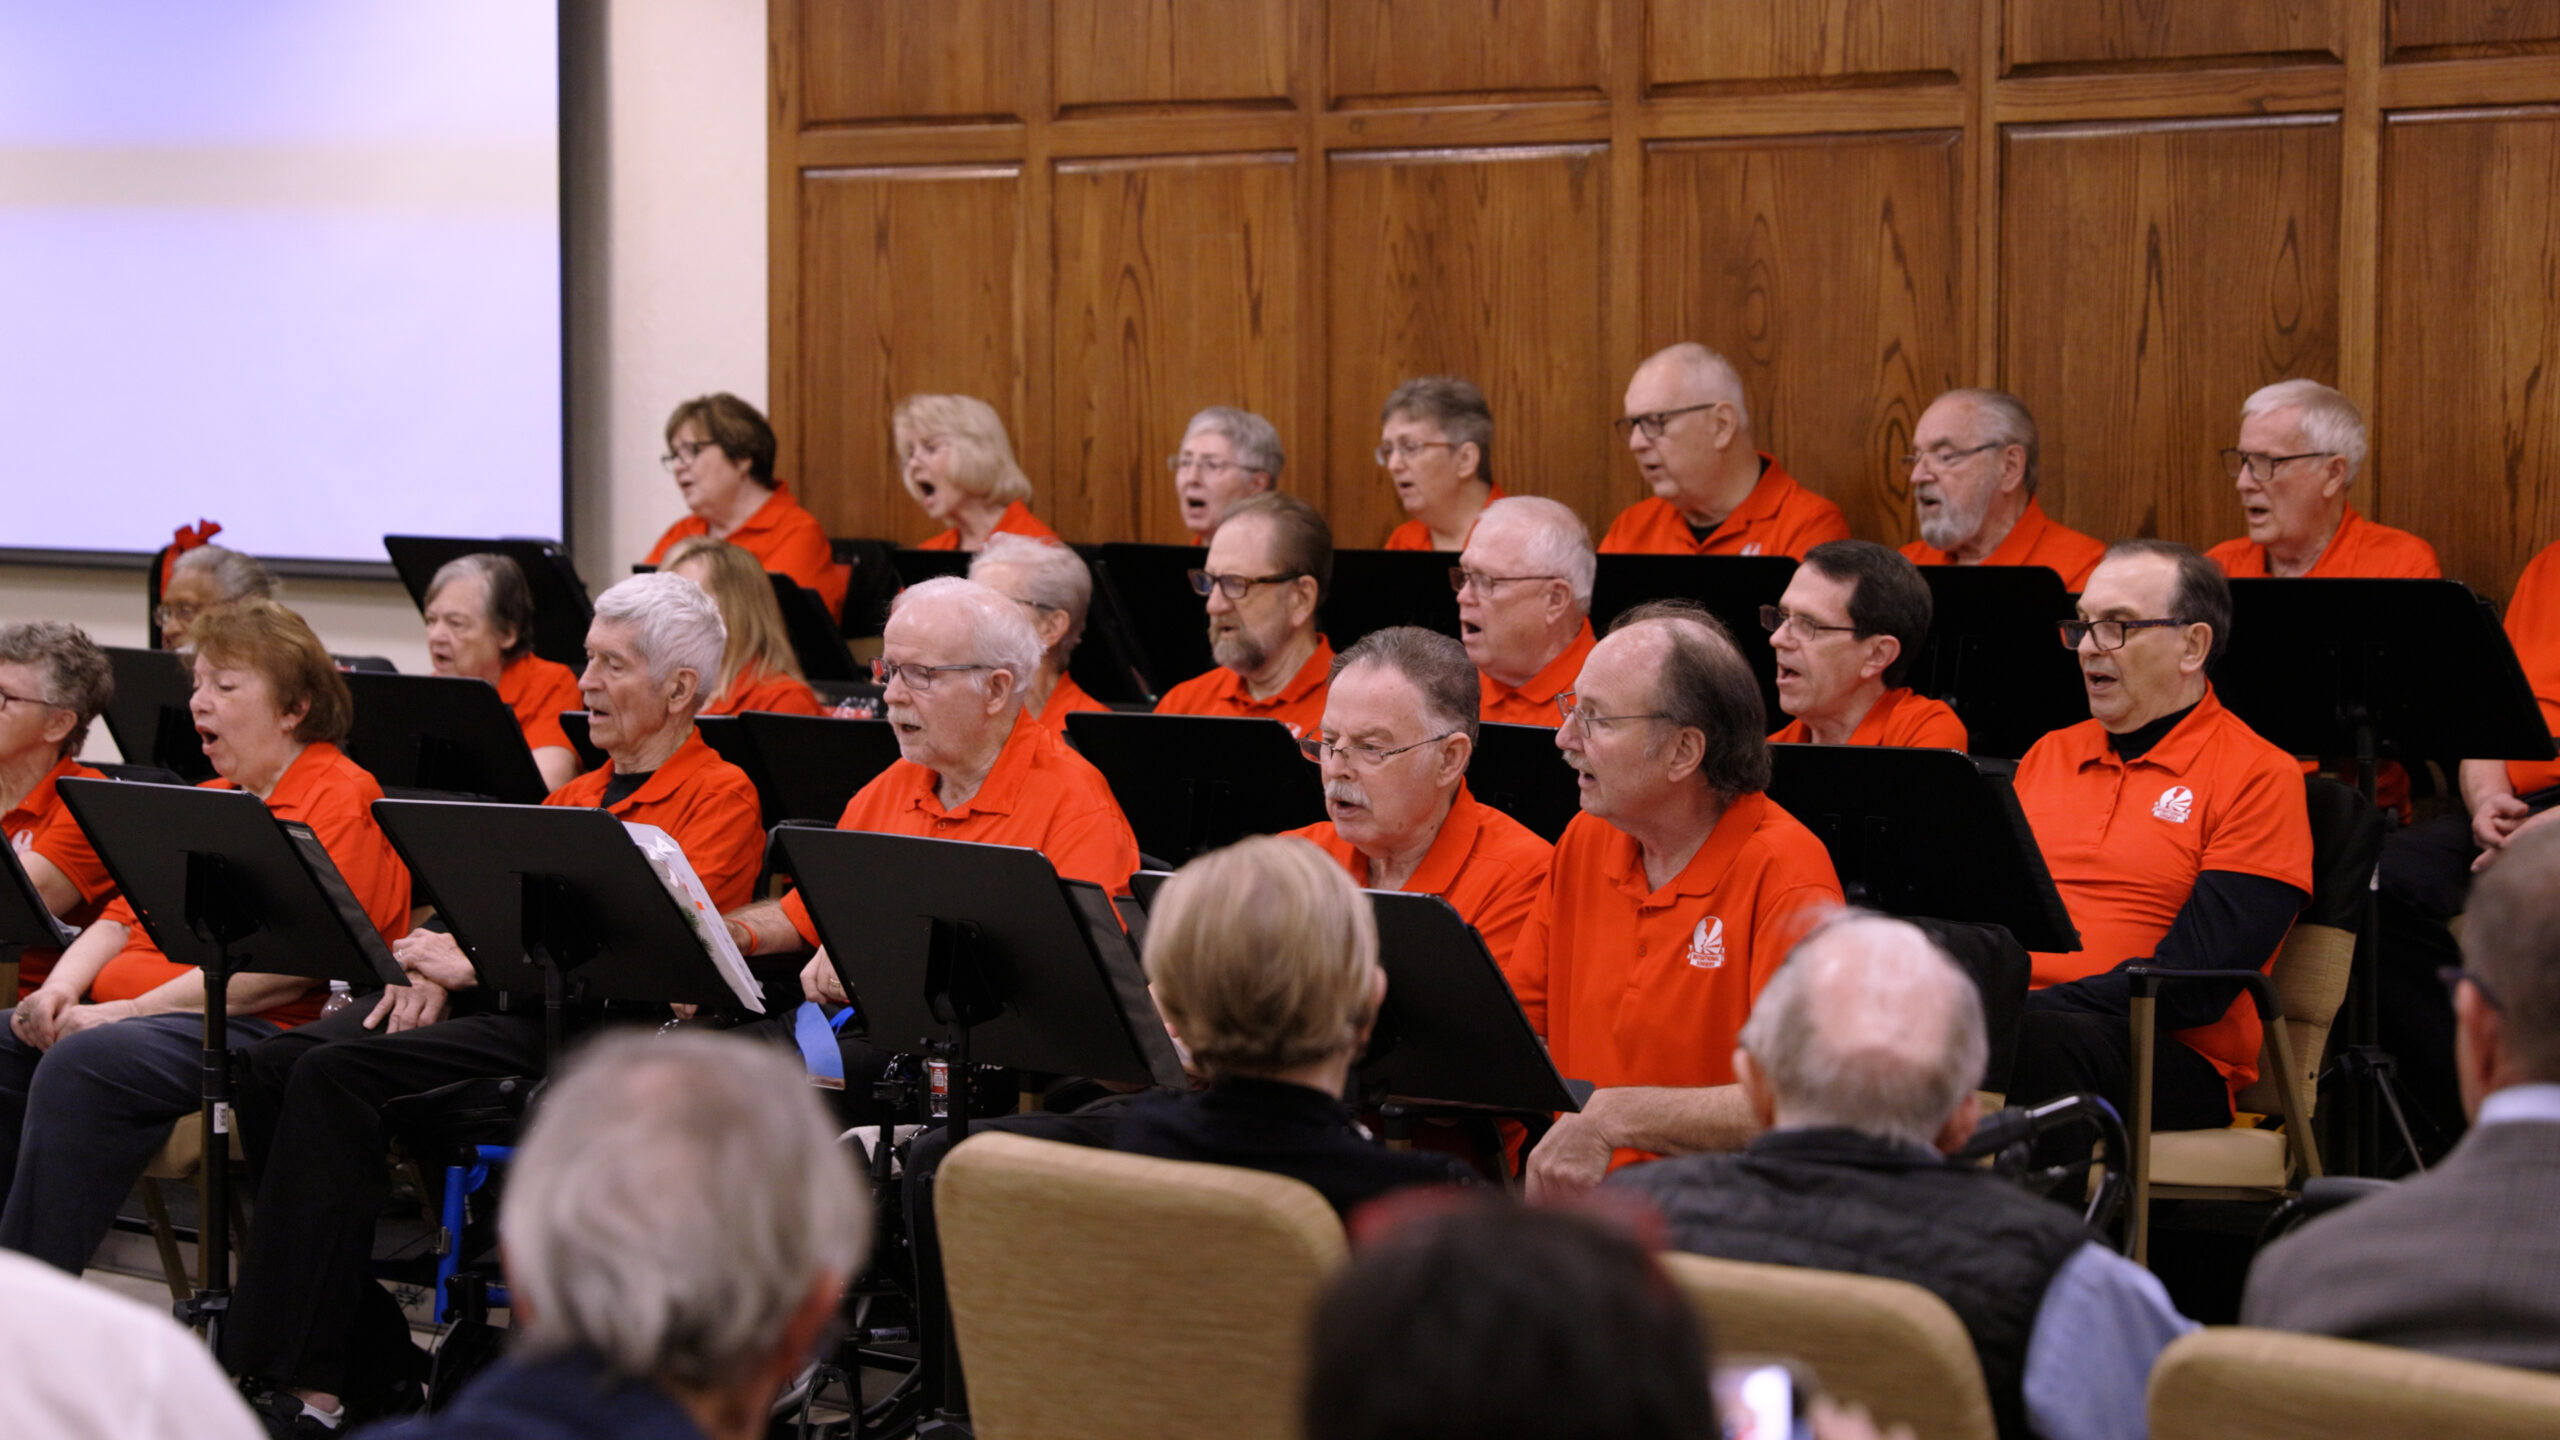 A group of people with Parkinson's sing together